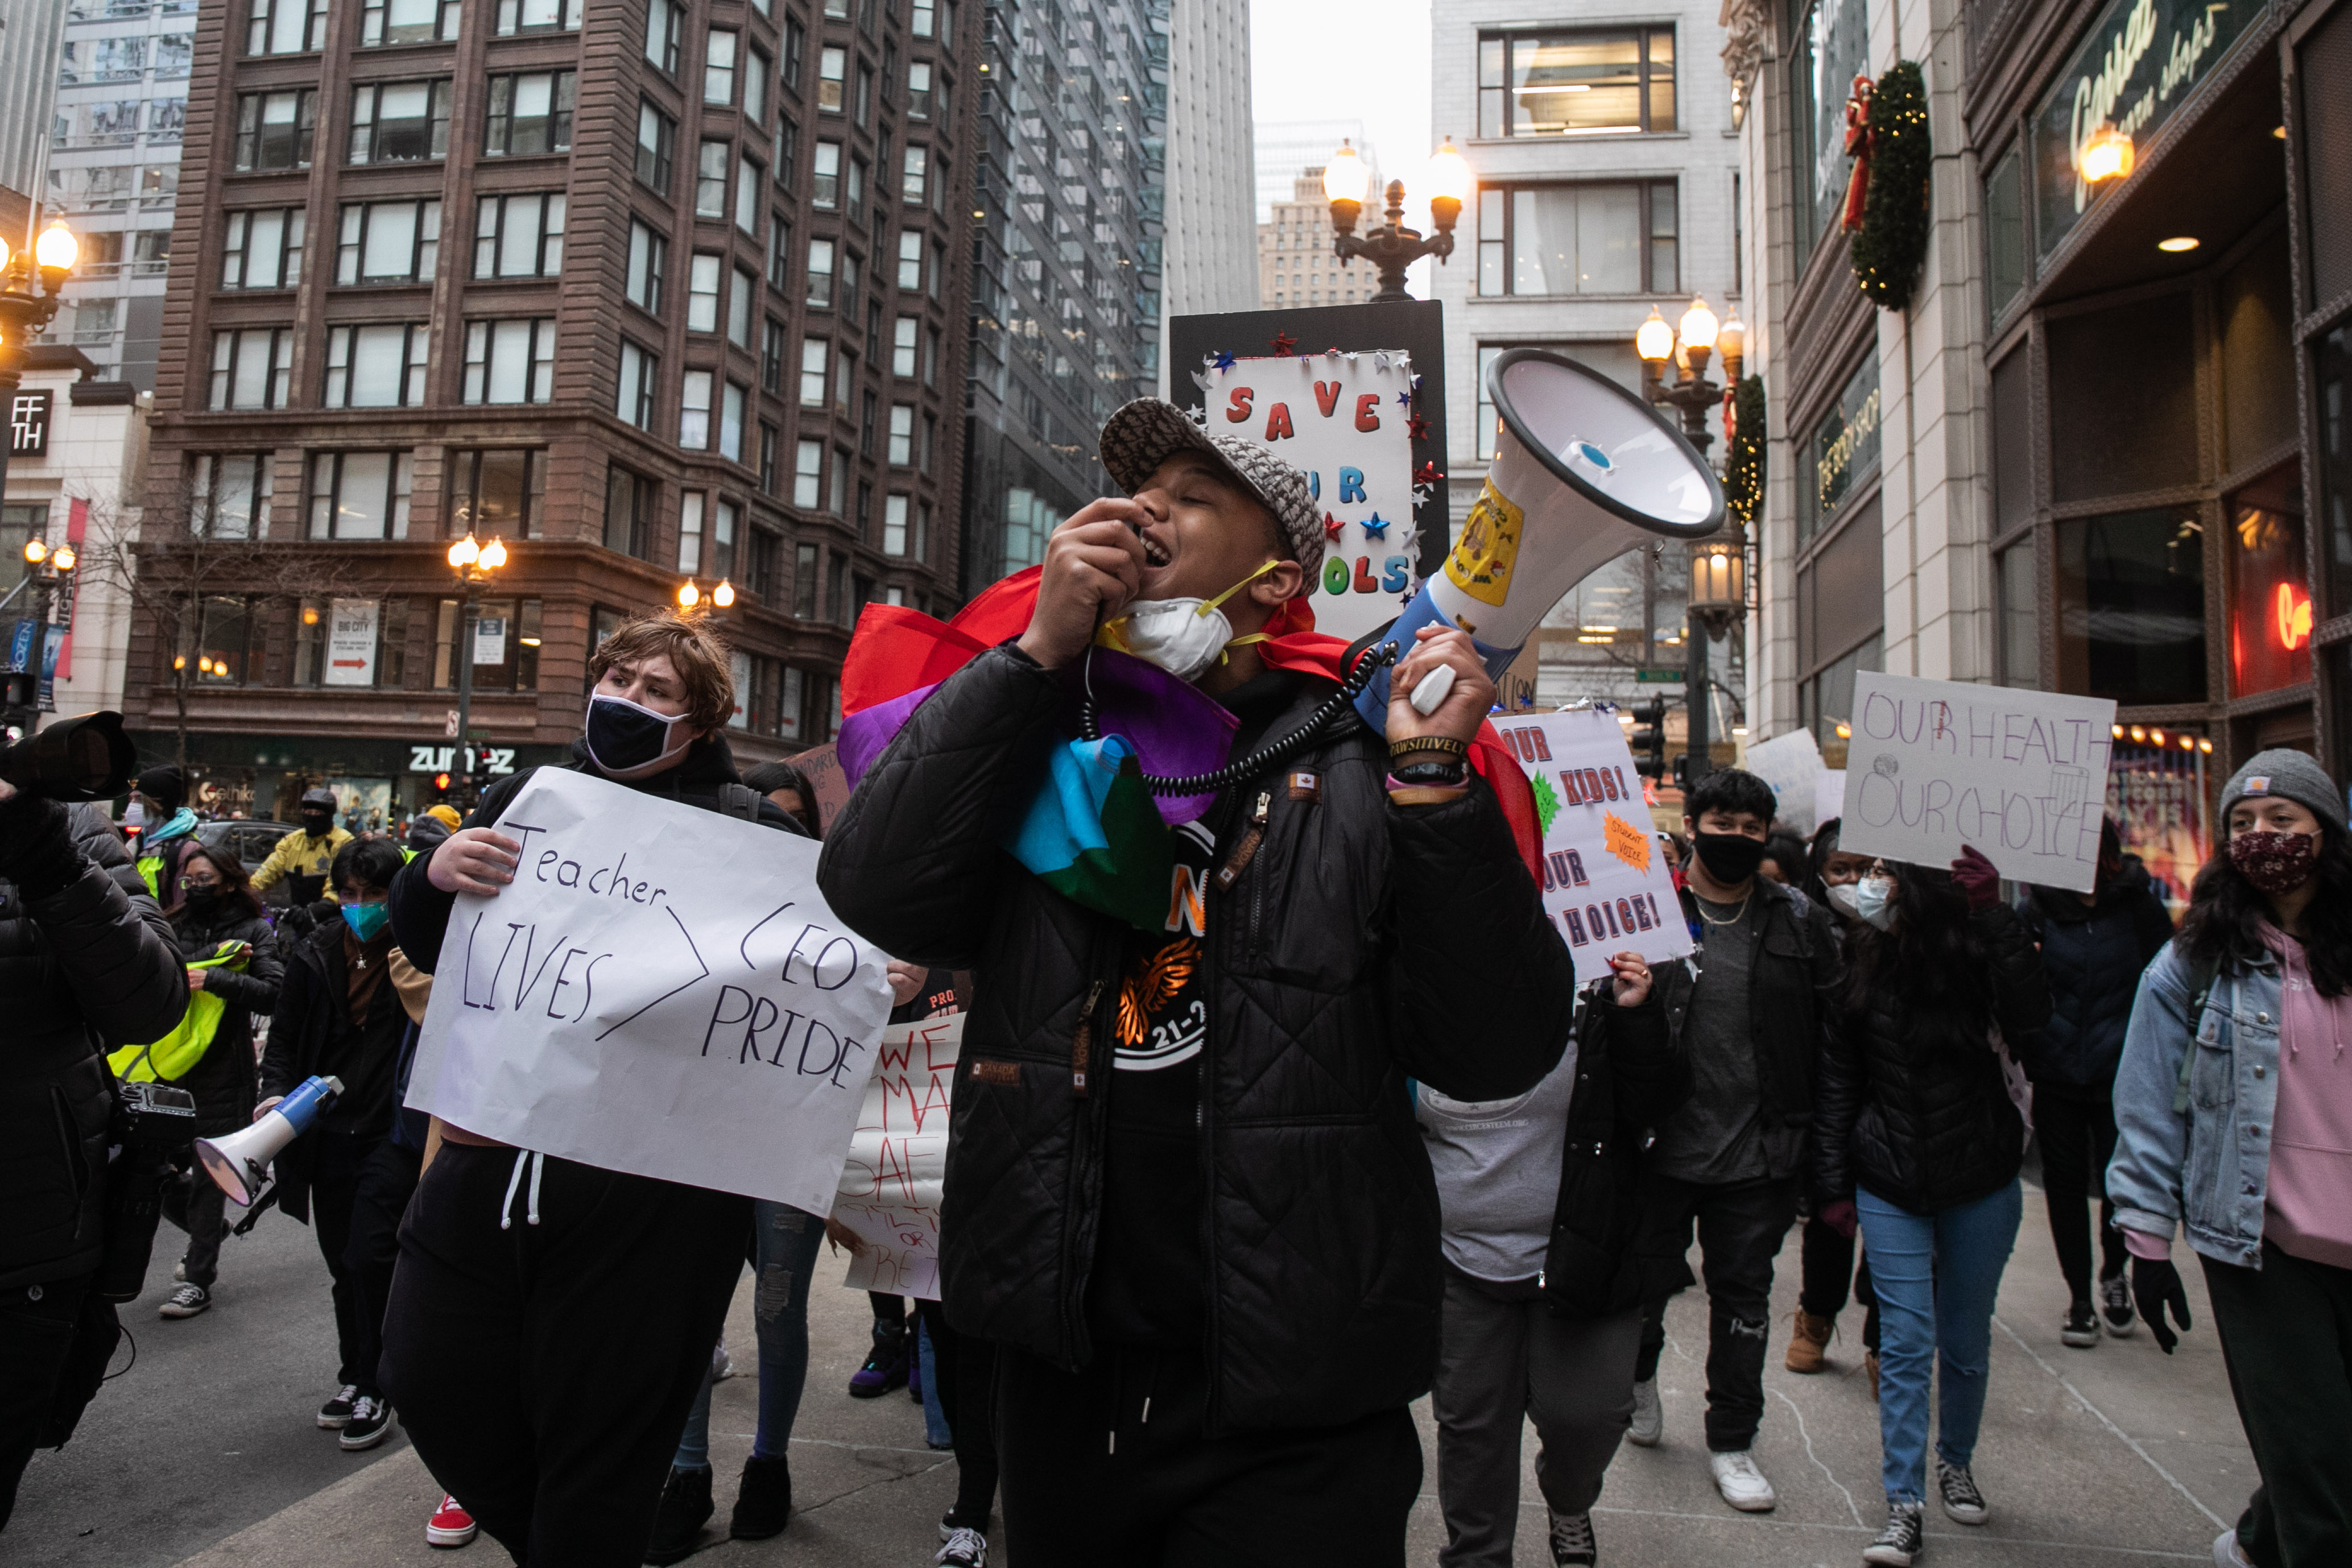 Hundreds of Chicago Public Schools students protest along West Madison Street after gathering outside the Chicago Public Schools headquarters in the Loop during a district-wide walkout to demand Mayor Lori Lightfoot, Chicago Department of Public Health Dr. Allison Arwady and Chicago Public Schools CEO Pedro Martinez to include them in the conversation about COVID-19 safety in schools, Friday afternoon, Jan. 14, 2022. Many students advocated for remote learning and stood with the Chicago Teachers Union which has been pushing for improved COVID-19 safety protocols in schools. | Pat Nabong/Sun-Times